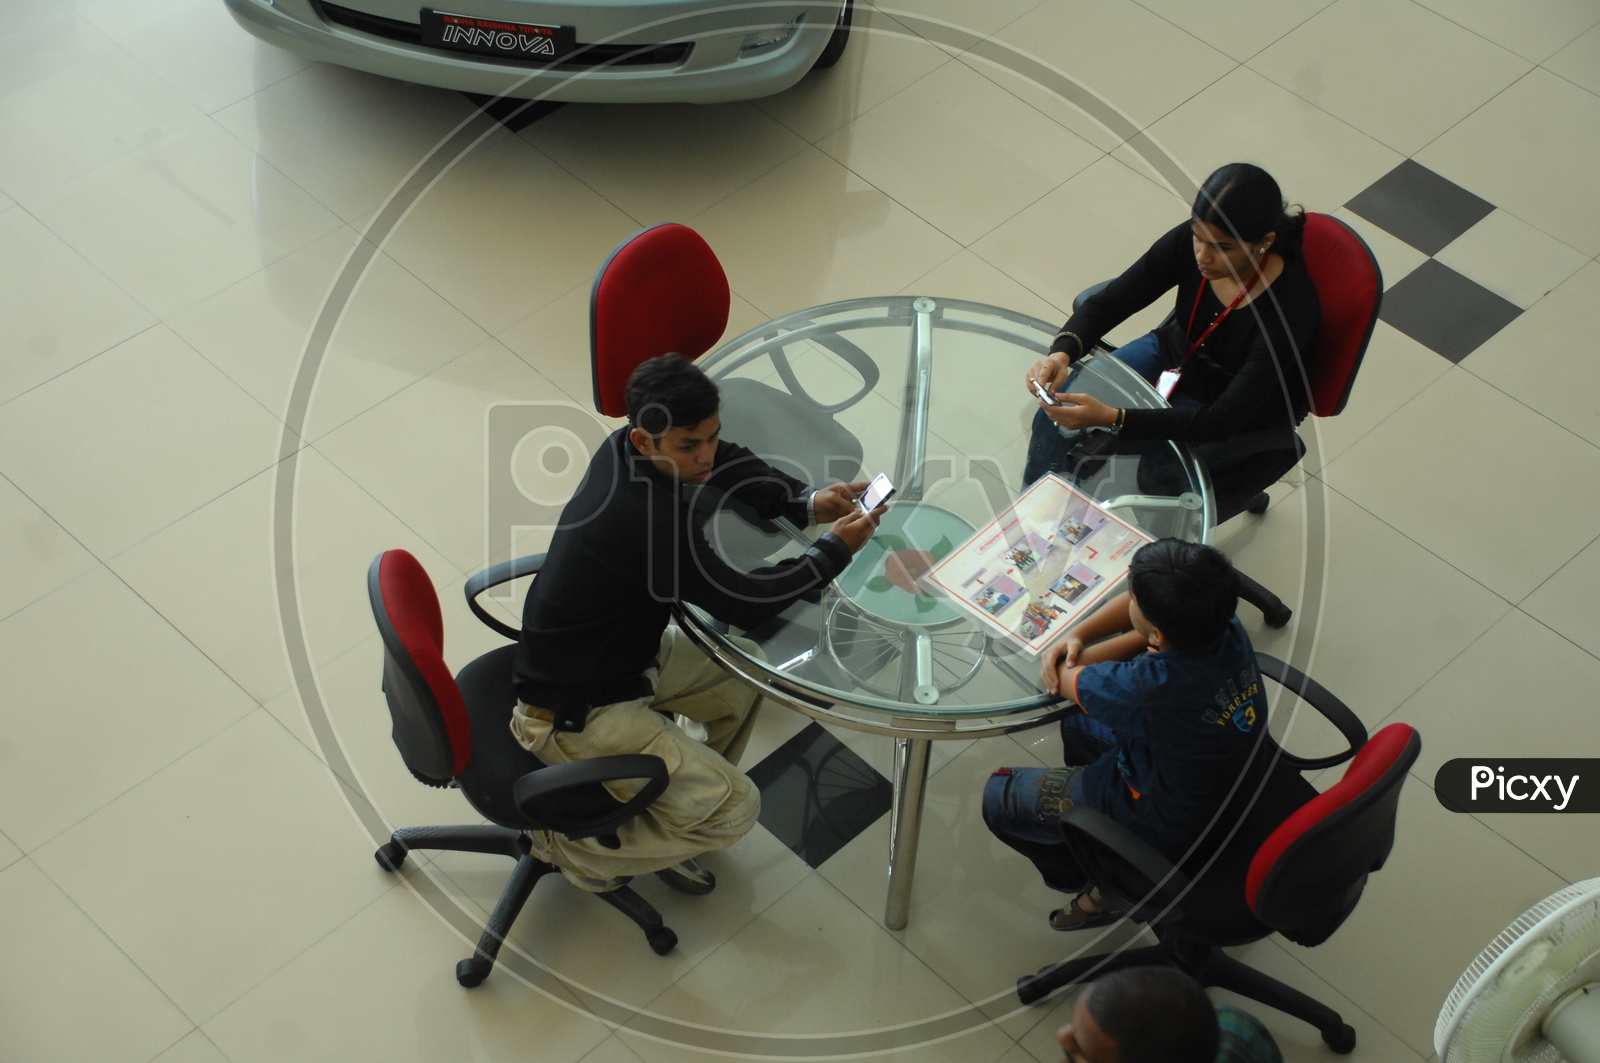 Kids sitting near a table in a car showroom